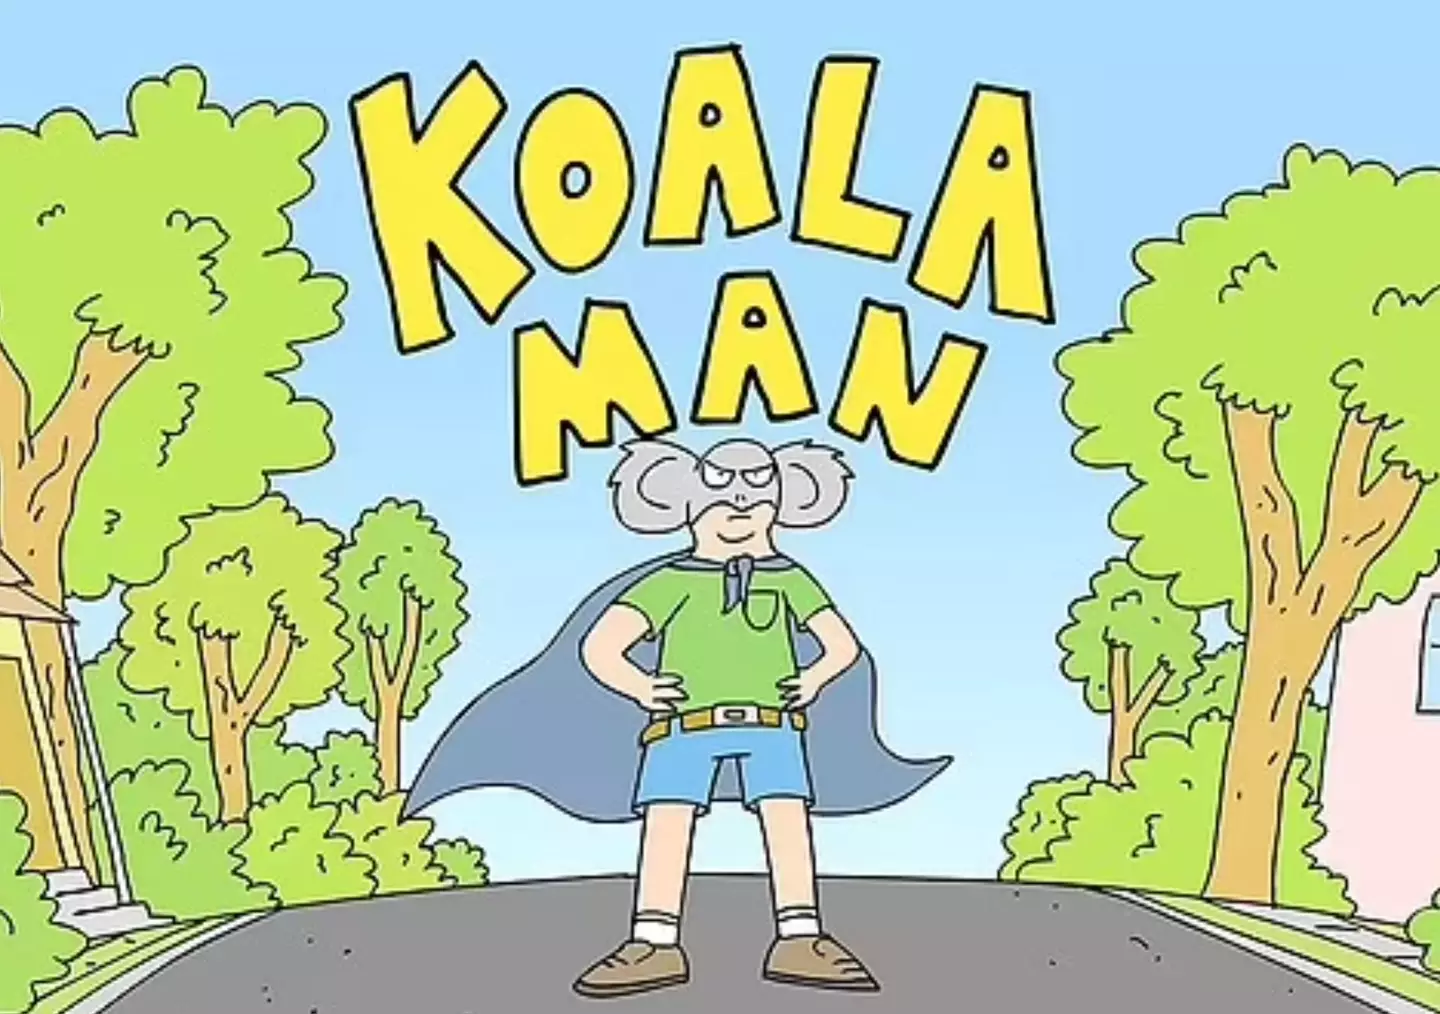 The 42-year-old will no long star in Koala Man.